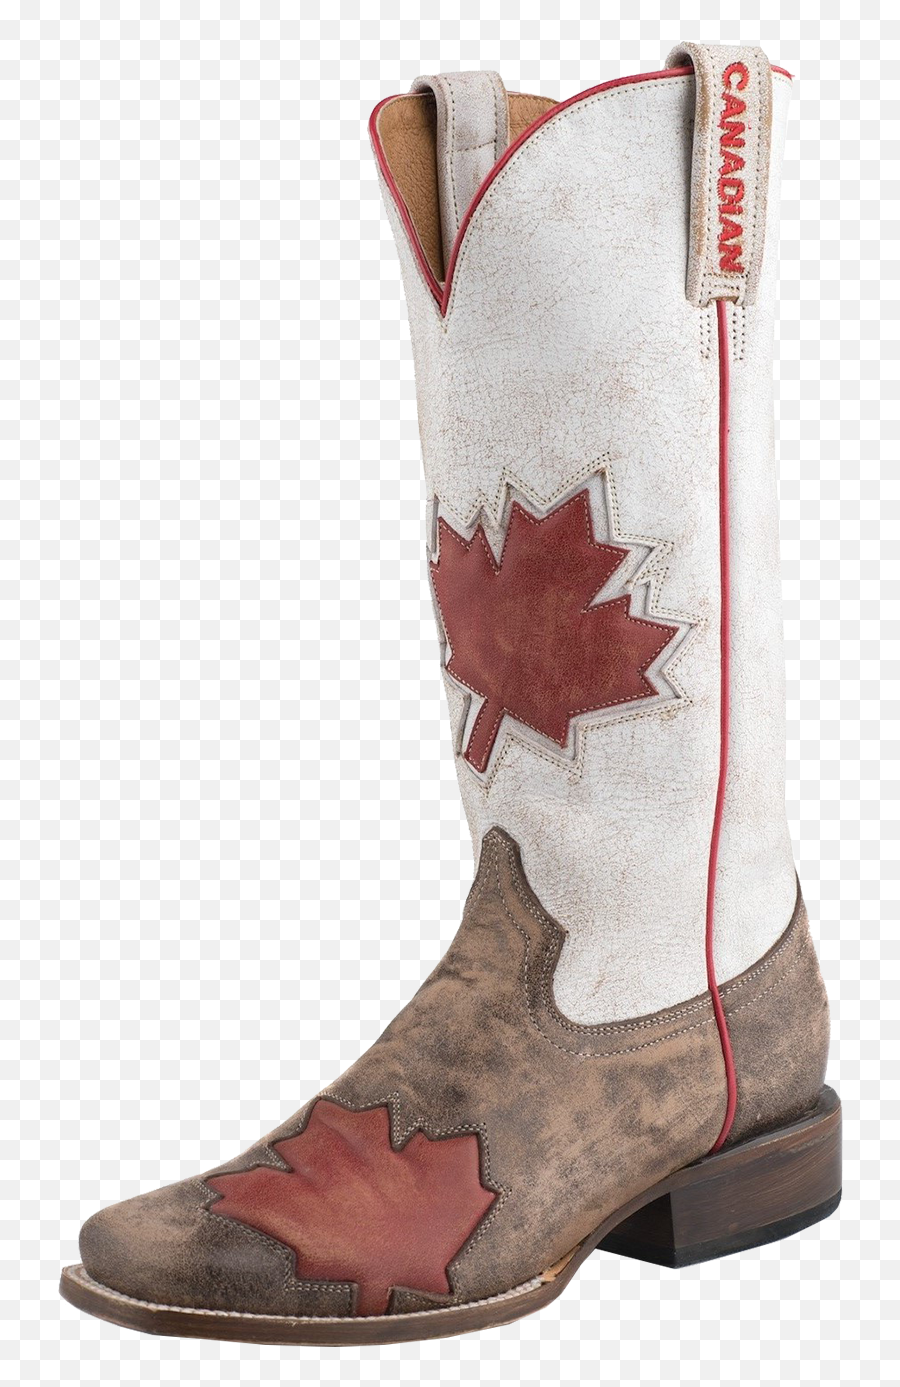 Canadian Flag Cowboy Boots Png Image - Canada Flag Cowboy Boots,Cowboy Boots Png